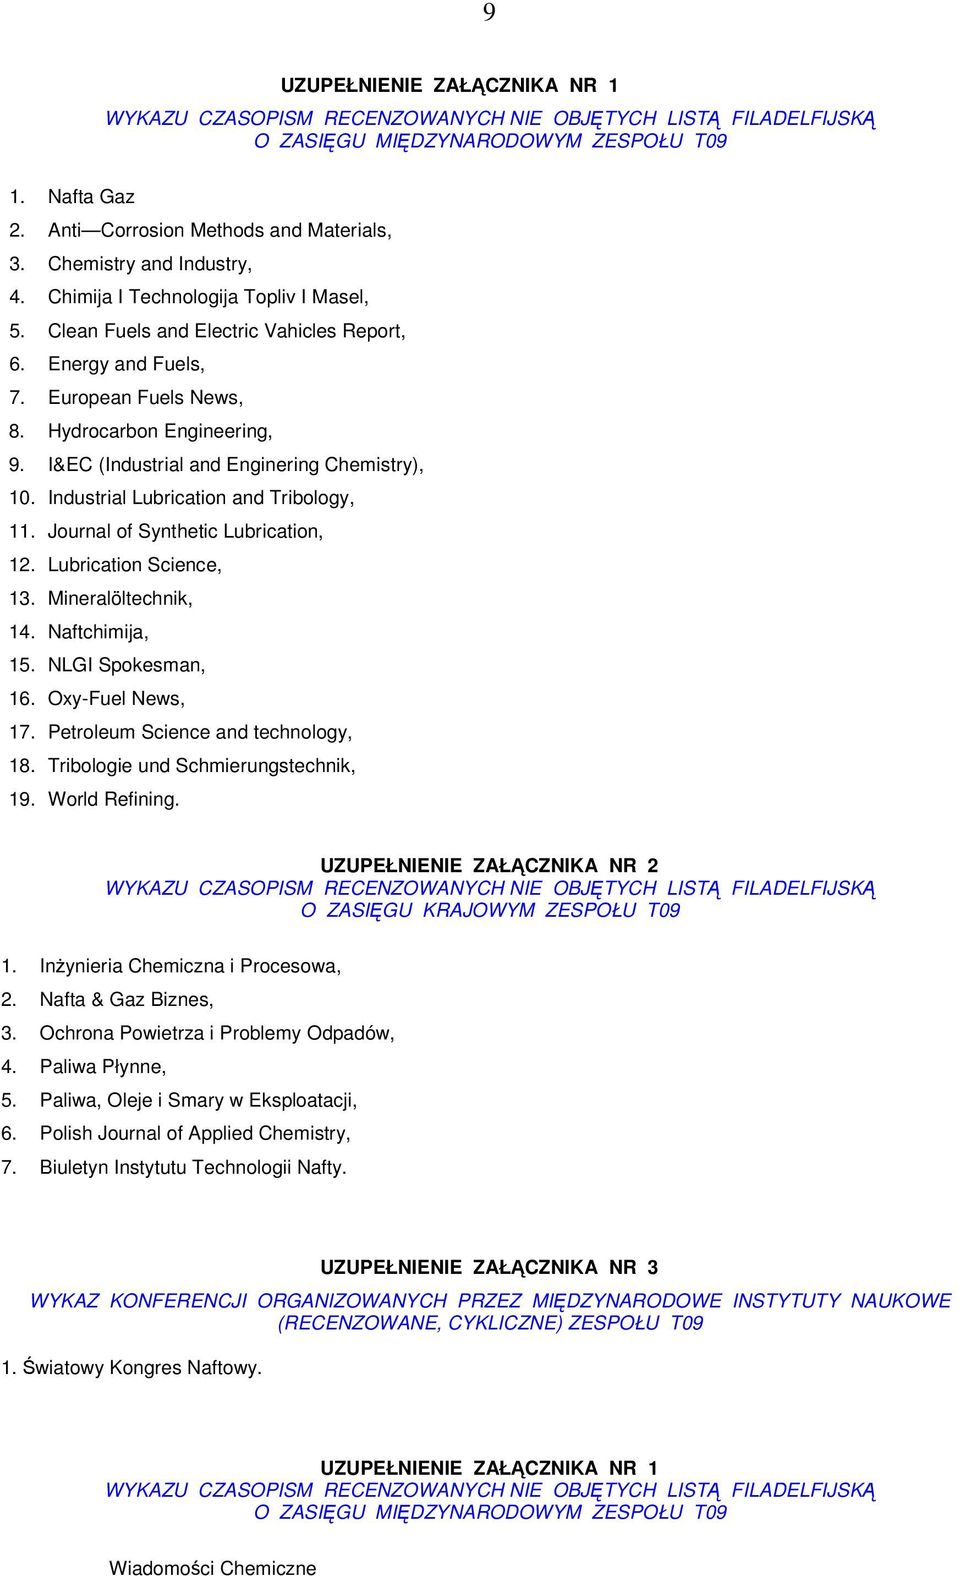 I&EC (Industrial and Enginering Chemistry), 10. Industrial Lubrication and Tribology, 11. Journal of Synthetic Lubrication, 12. Lubrication Science, 13. Mineralöltechnik, 14. Naftchimija, 15.